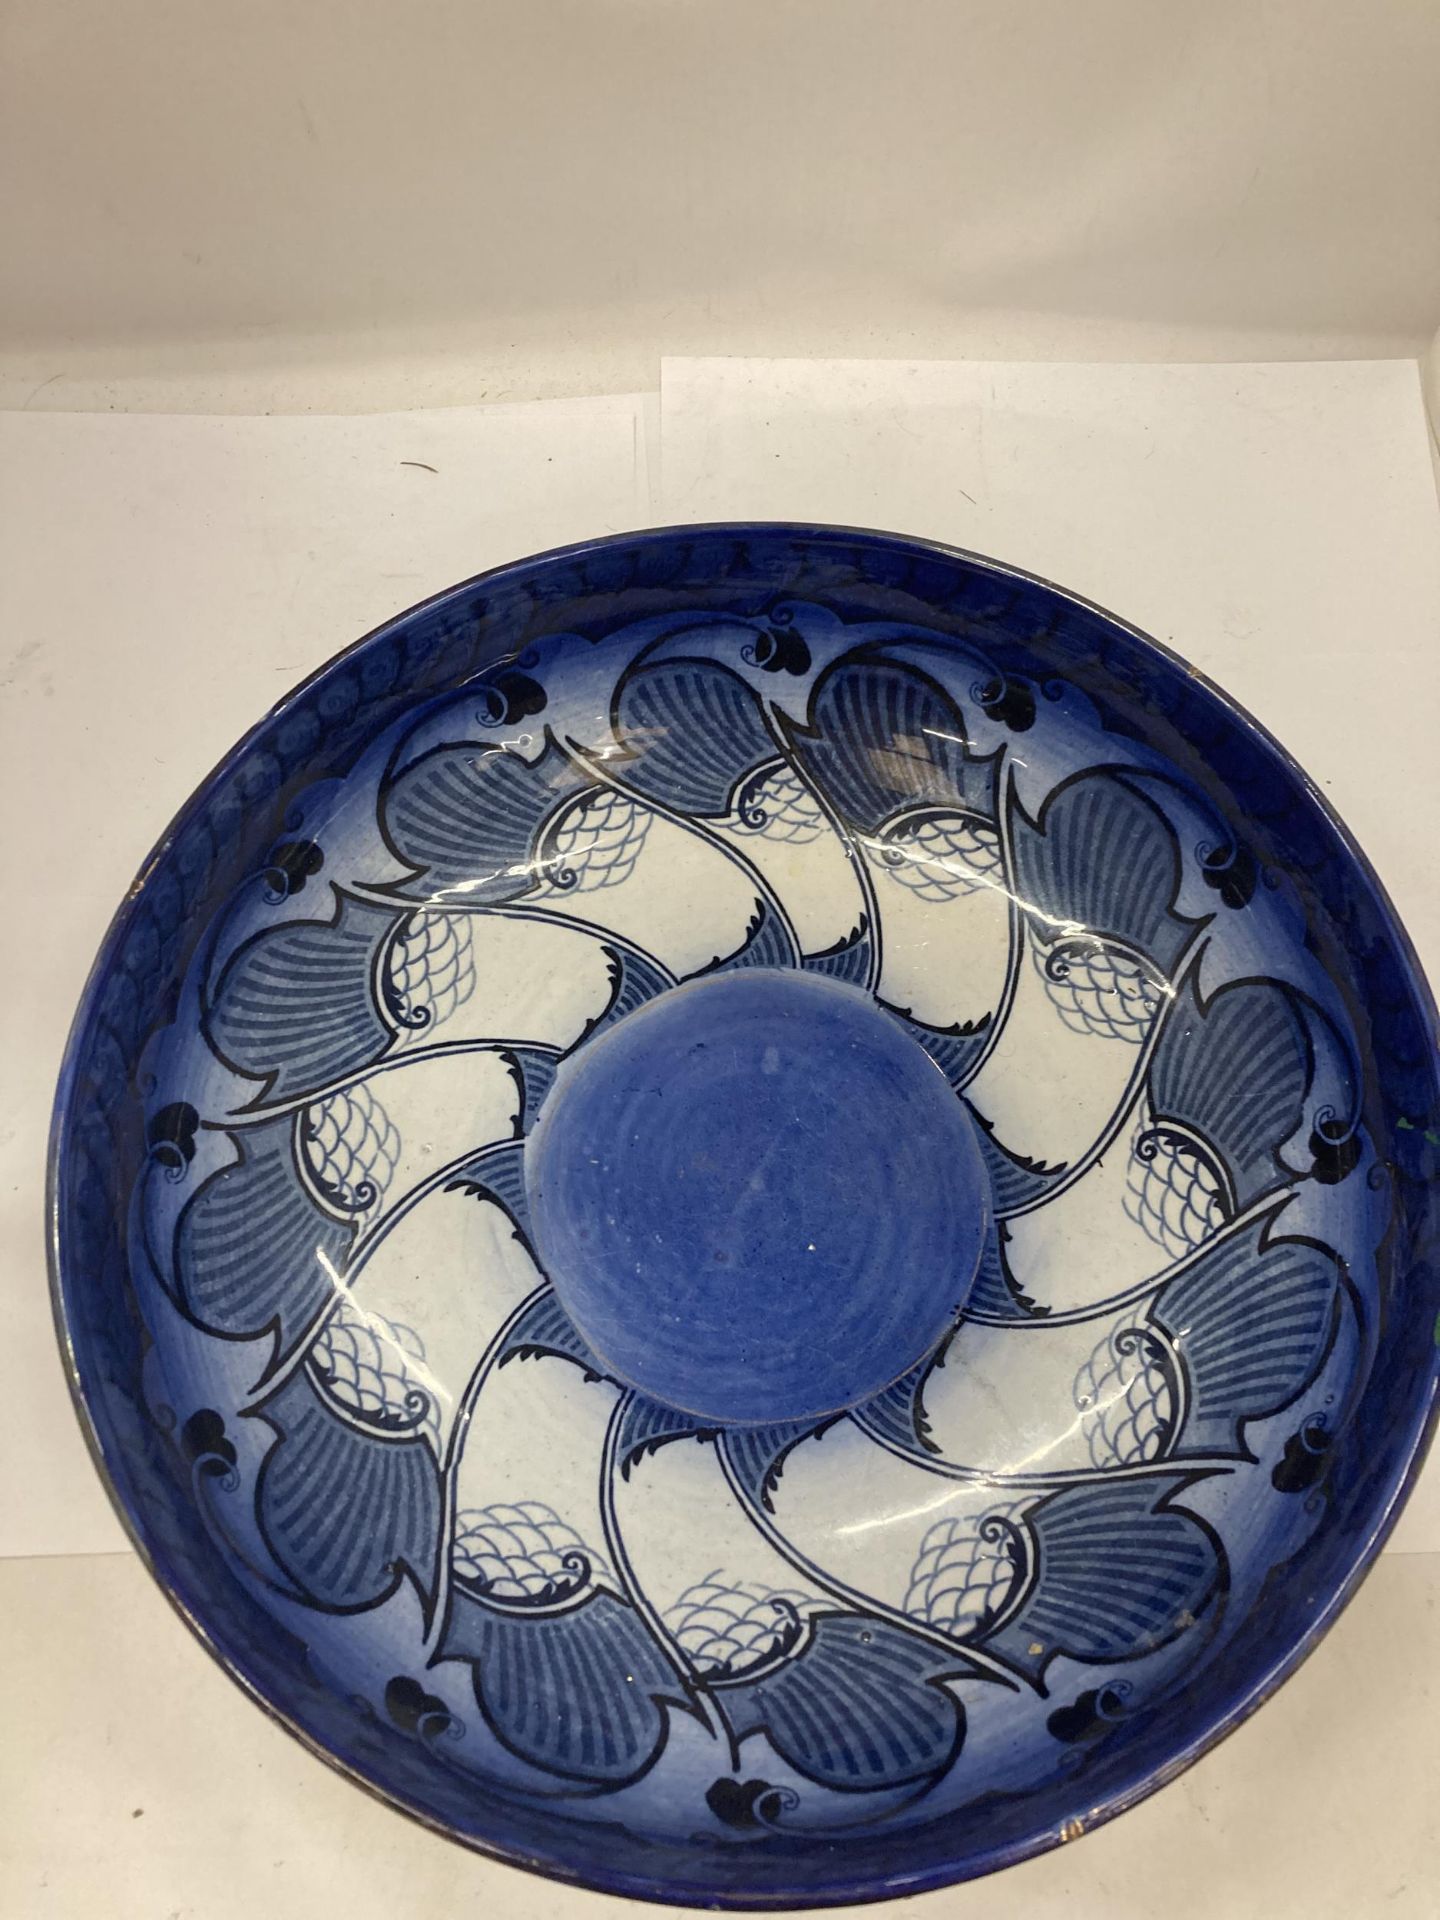 AN ART NOUVEAU ROYAL DOULTON BLUE AND WHITE FRUIT BOWL WITH ARTISTS MONOGRAM TO BASE - Image 2 of 4